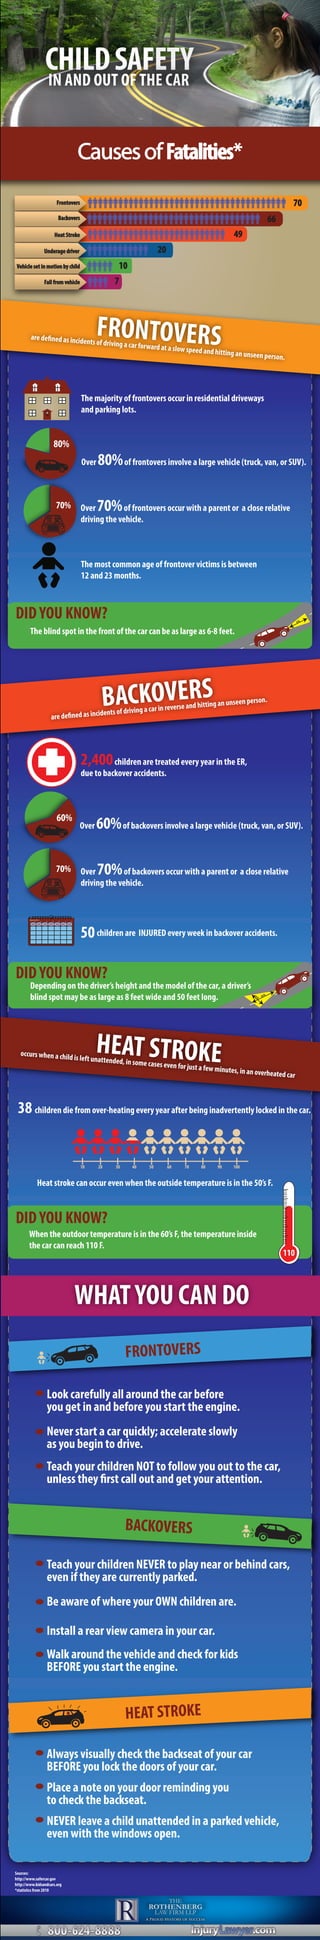 BACKOVERS
are defined as incidents of driving a car in reverse and hitting an unseen person.
2,400children are treated every year in the ER,
due to backover accidents.
Over 60%of backovers involve a large vehicle (truck, van, or SUV).
HEAT STROKEoccurs when a child is left unattended, in some cases even for just a few minutes, in an overheated car
FRONTOVERSare defined as incidents of driving a car forward at a slow speed and hitting an unseen person.
38 children die from over-heating every year after being inadvertently locked in the car.
Heat stroke can occur even when the outside temperature is in the 50’s F.
When the outdoor temperature is in the 60’s F, the temperature inside
the car can reach 110 F.
110
DIDYOU KNOW?
Walk around the vehicle and check for kids
BEFORE you start the engine.
BACKOVERS
HEAT STROKE
Install a rear view camera in your car.
children are INJURED every week in backover accidents.50
49
66
20
10
7
70
Teach your children NEVER to play near or behind cars,
even if they are currently parked.
Be aware of where your OWN children are.
Always visually check the backseat of your car
BEFORE you lock the doors of your car.
Place a note on your door reminding you
to check the backseat.
NEVER leave a child unattended in a parked vehicle,
even with the windows open.
Teach your children NOT to follow you out to the car,
unless they first call out and get your attention.
Look carefully all around the car before
you get in and before you start the engine.
Never start a car quickly; accelerate slowly
as you begin to drive.
Over 70%of backovers occur with a parent or a close relative
driving the vehicle.
FRONTOVERS
60%
70%
DIDYOU KNOW?
Depending on the driver’s height and the model of the car, a driver’s
blind spot may be as large as 8 feet wide and 50 feet long. 8ft.
50ft.
Sources:
http://www.safercar.gov
http://www.kidsandcars.org
*statistics from 2010
CHILDSAFETYIN AND OUT OF THE CAR
CausesofFatalities*
Sun
March 2014 Mon Tues Wed Thurs Fri Sat
The majority of frontovers occur in residential driveways
and parking lots.
Over 80%of frontovers involve a large vehicle (truck, van, or SUV).
The most common age of frontover victims is between
12 and 23 months.
Over 70%of frontovers occur with a parent or a close relative
driving the vehicle.
70%
80%
WHATYOU CAN DO
DIDYOU KNOW?
The blind spot in the front of the car can be as large as 6-8 feet.
8ft.
Fall from vehicle
Vehicle set in motion by child
Underage driver
Heat Stroke
Backovers
Frontovers
10 20 30 40 50 60 70 80 90 100
 